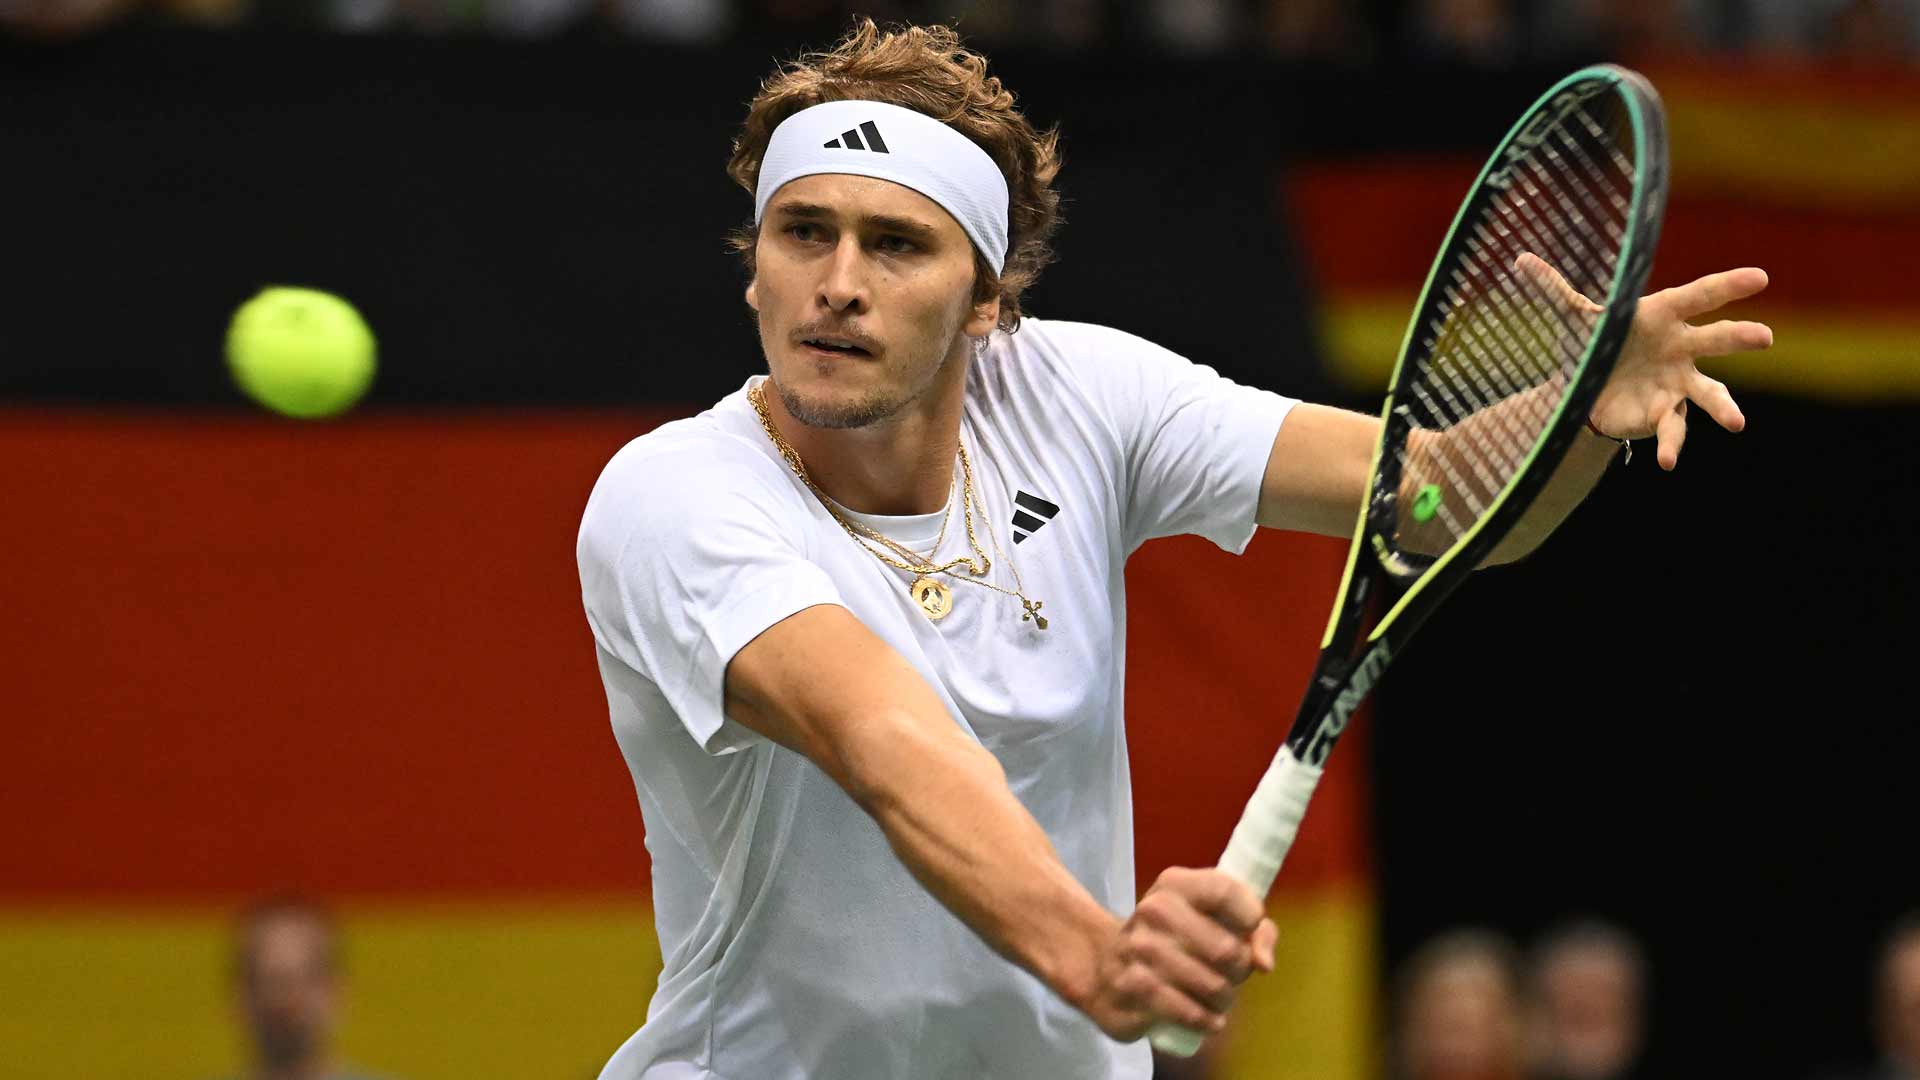 Alexander Zverev in action during his Davis Cup win against Stan Wawrinka on Friday in Trier.